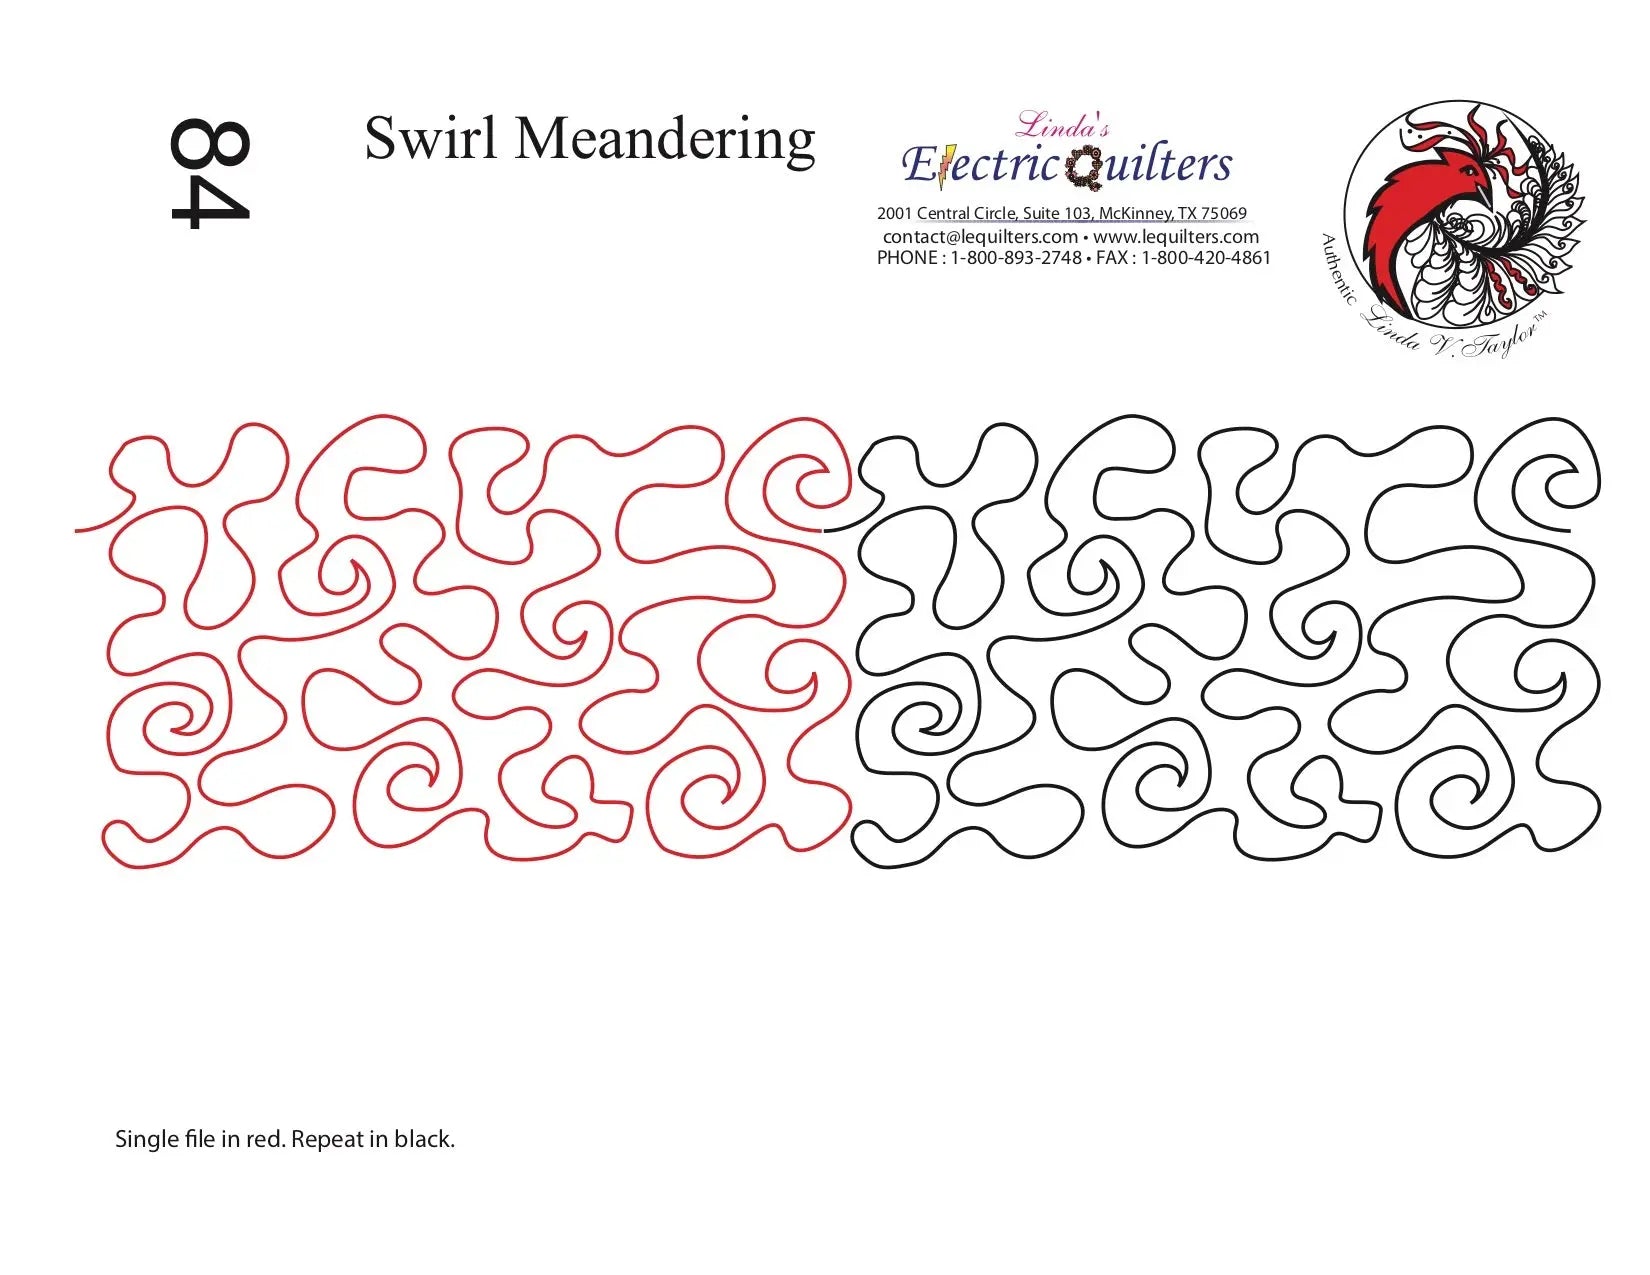 084 Swirl Meandering Pantograph by Linda V. Taylor - Linda's Electric Quilters